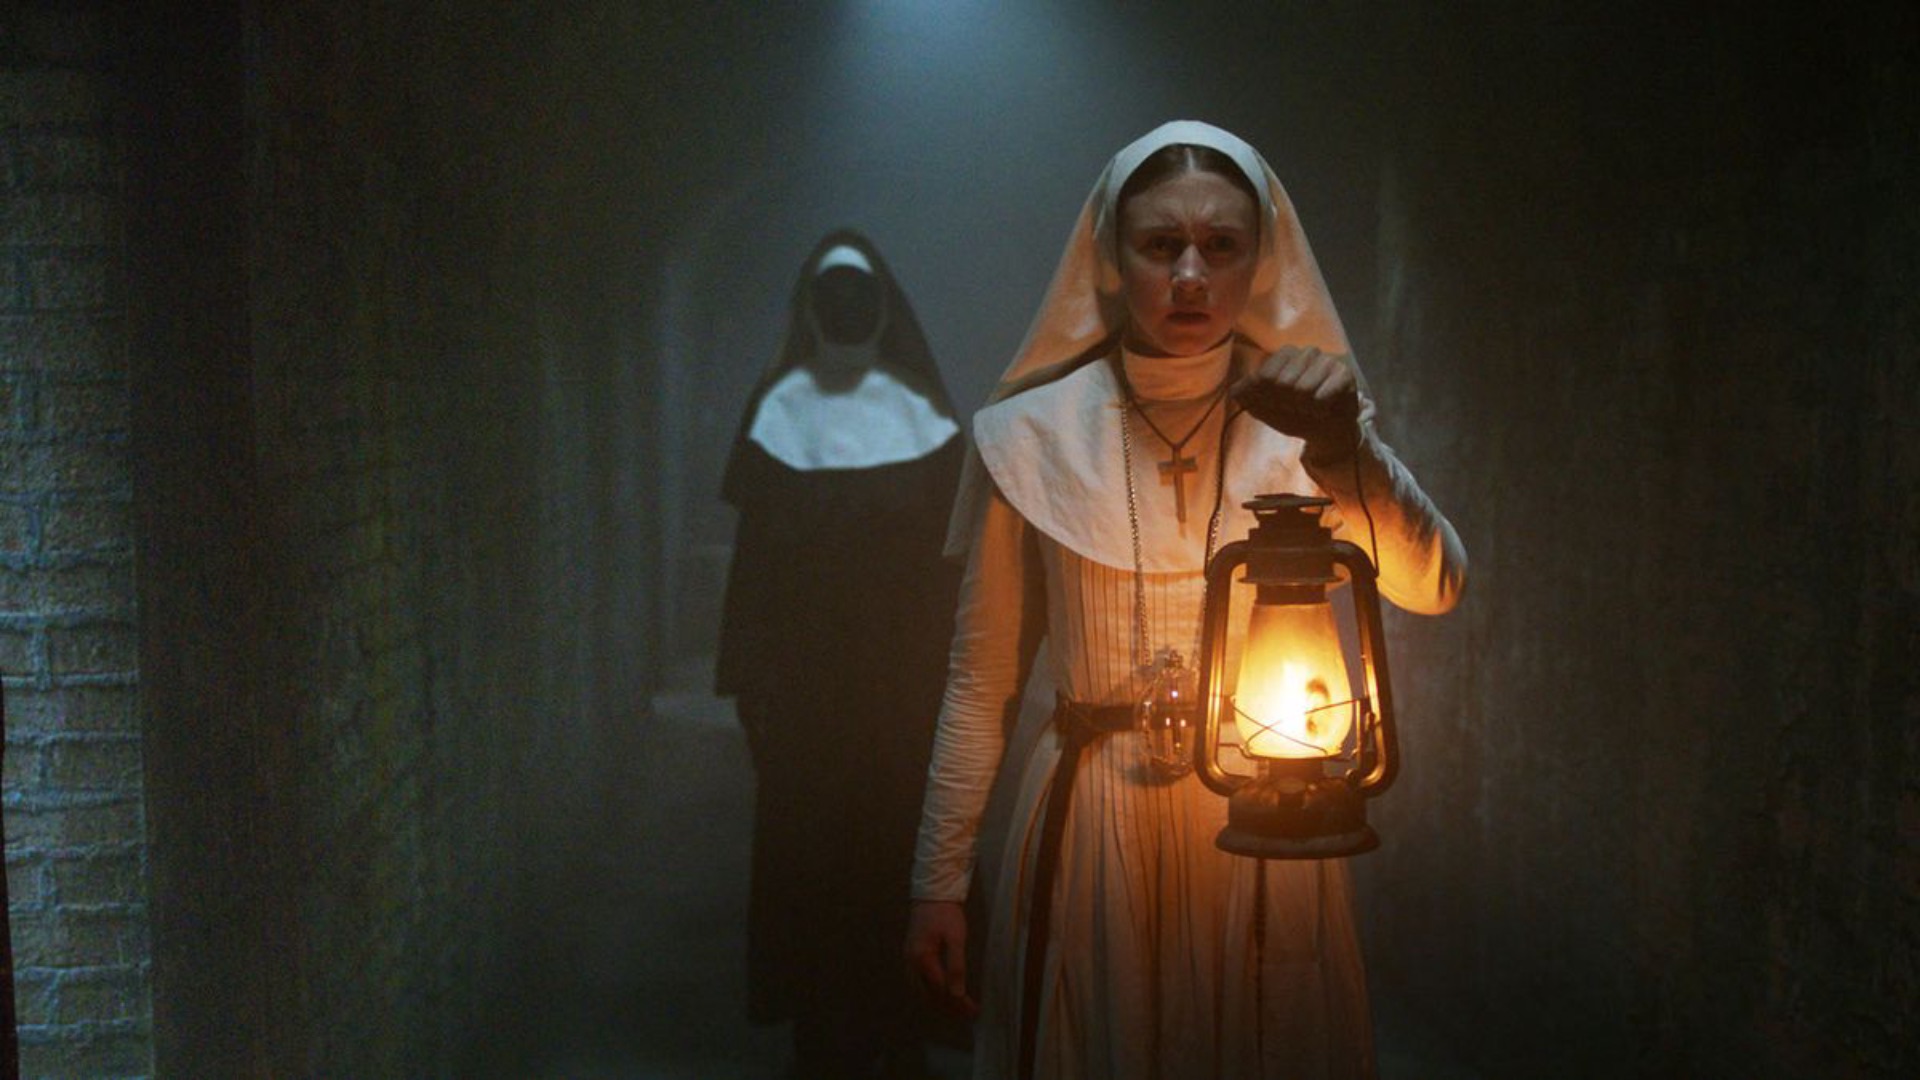 The Nun 2 review: "Best stop now before it becomes a habit" | GamesRadar+